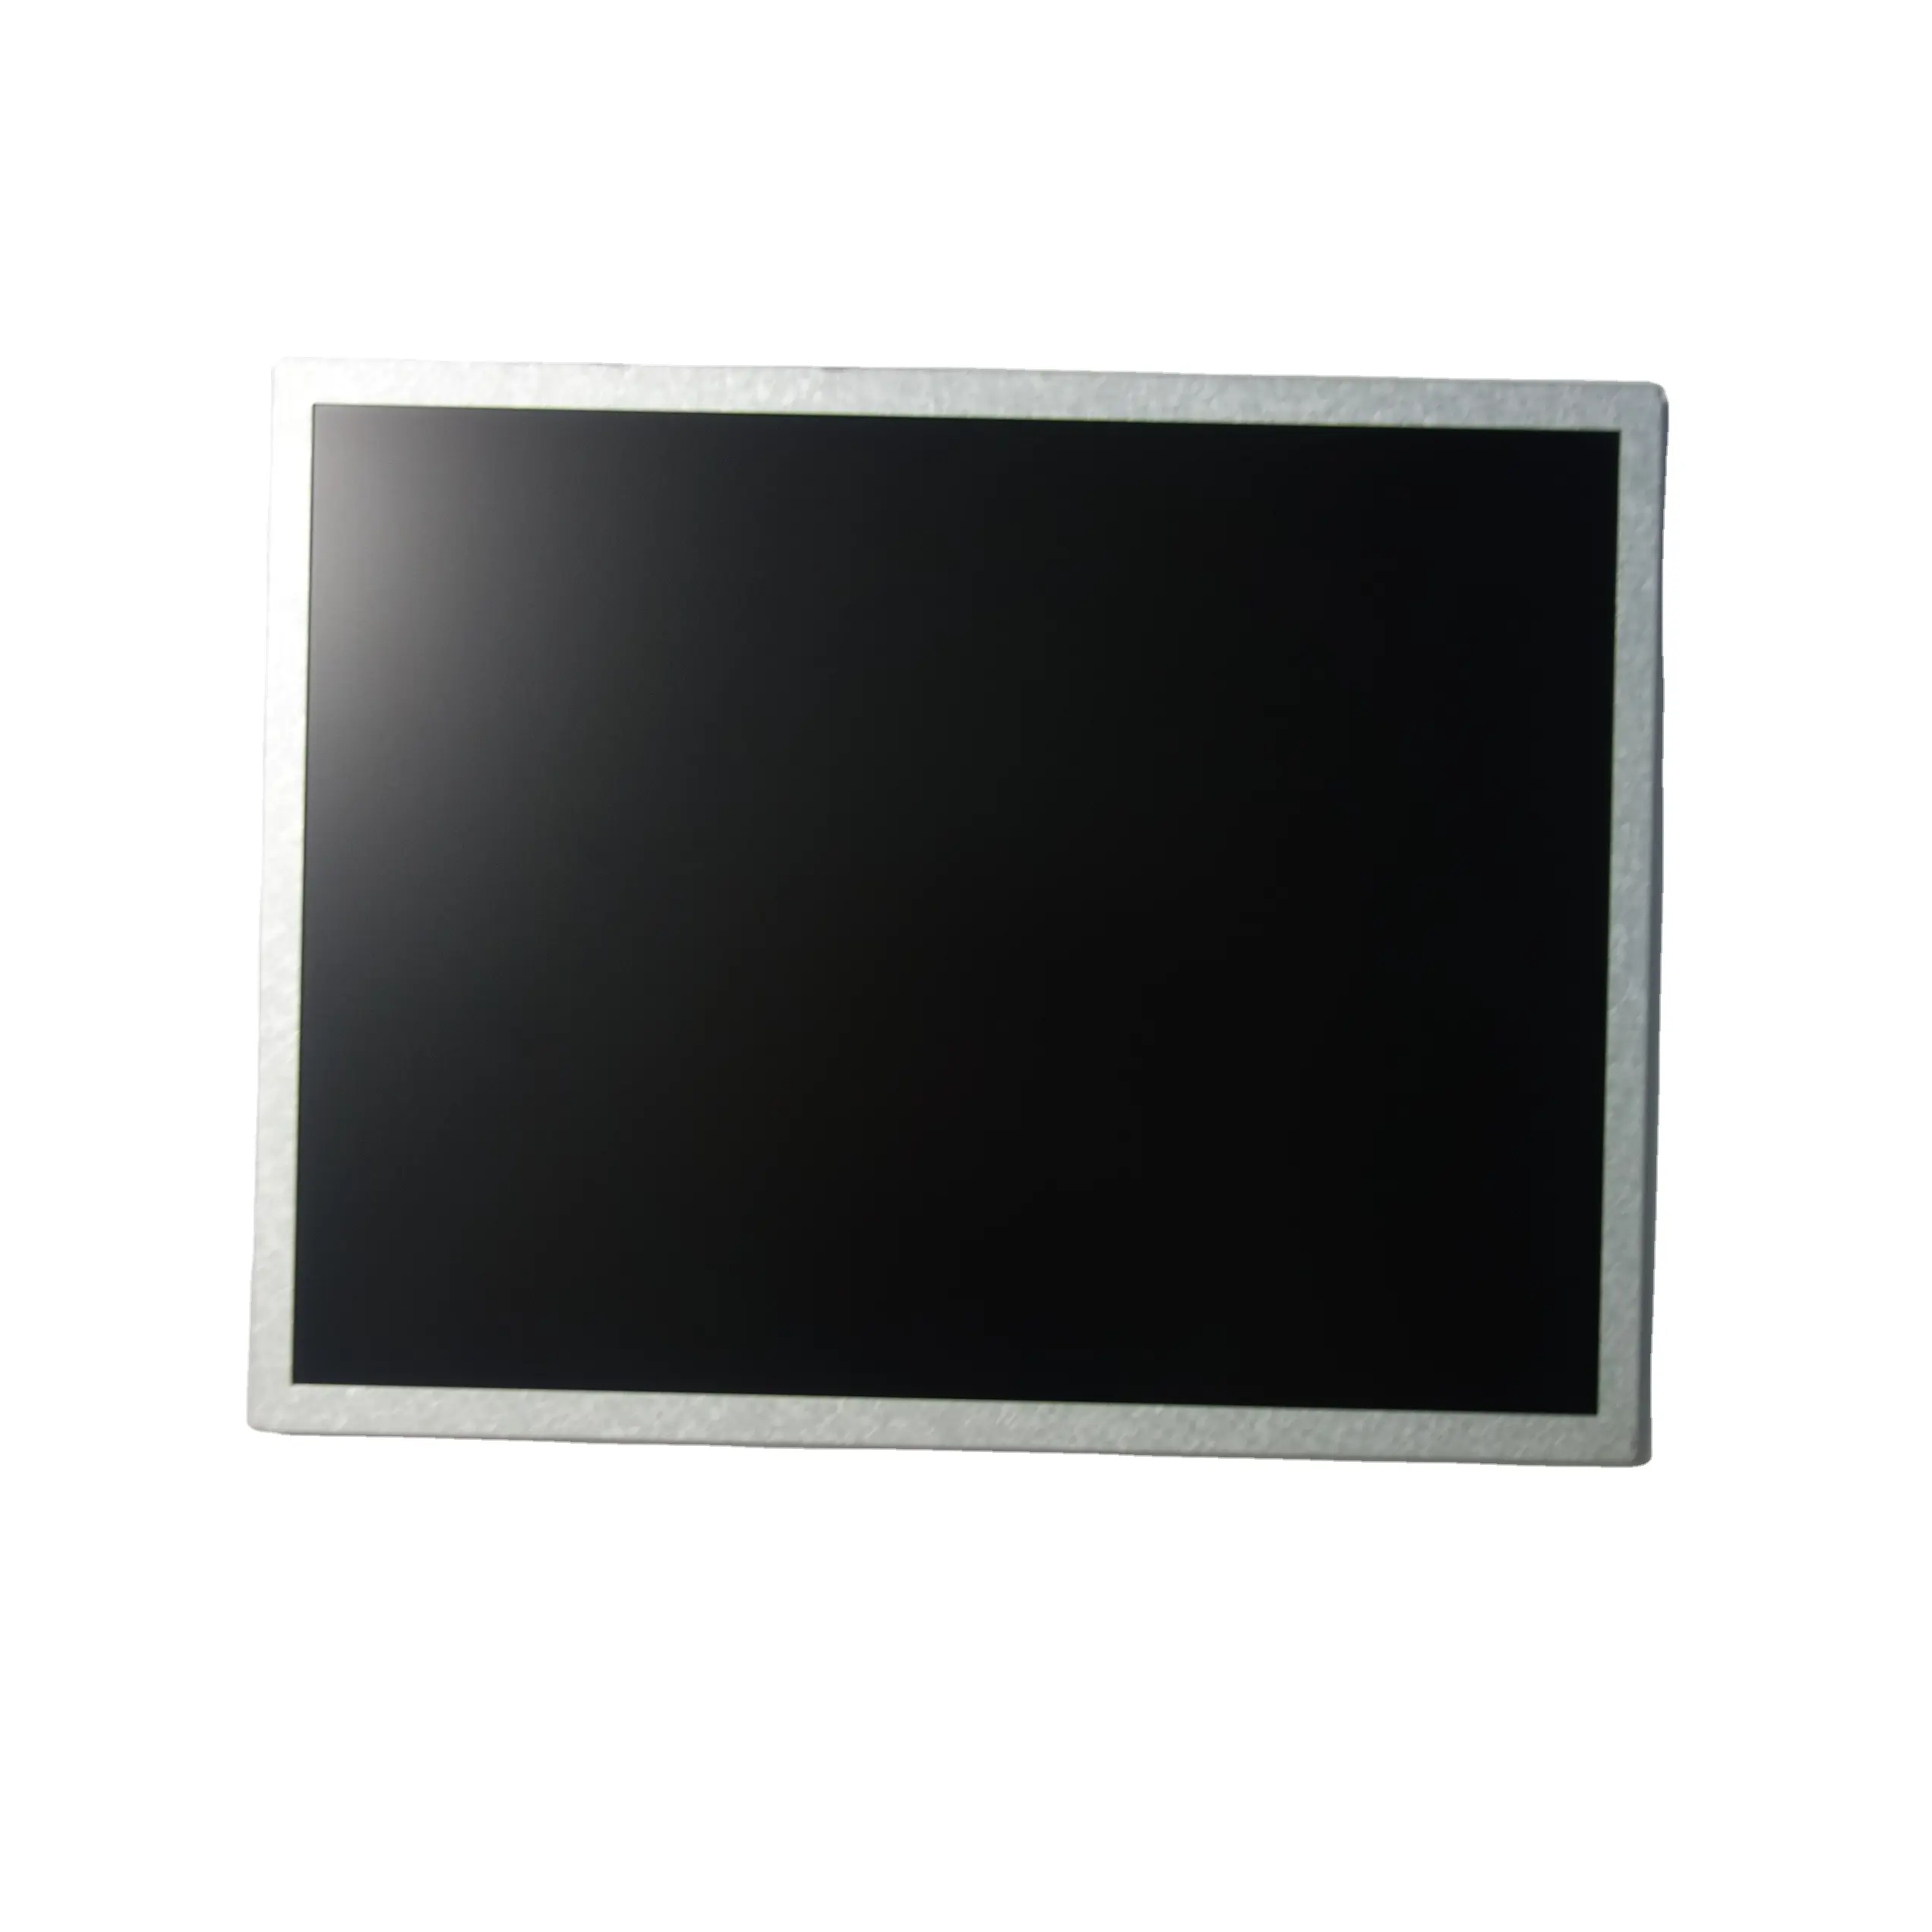 G150XTN03.0 AUO TFT LCD monitor 1024x768 resolution 20pins LVDS interface guangdong wholesales industrial panel computer screen